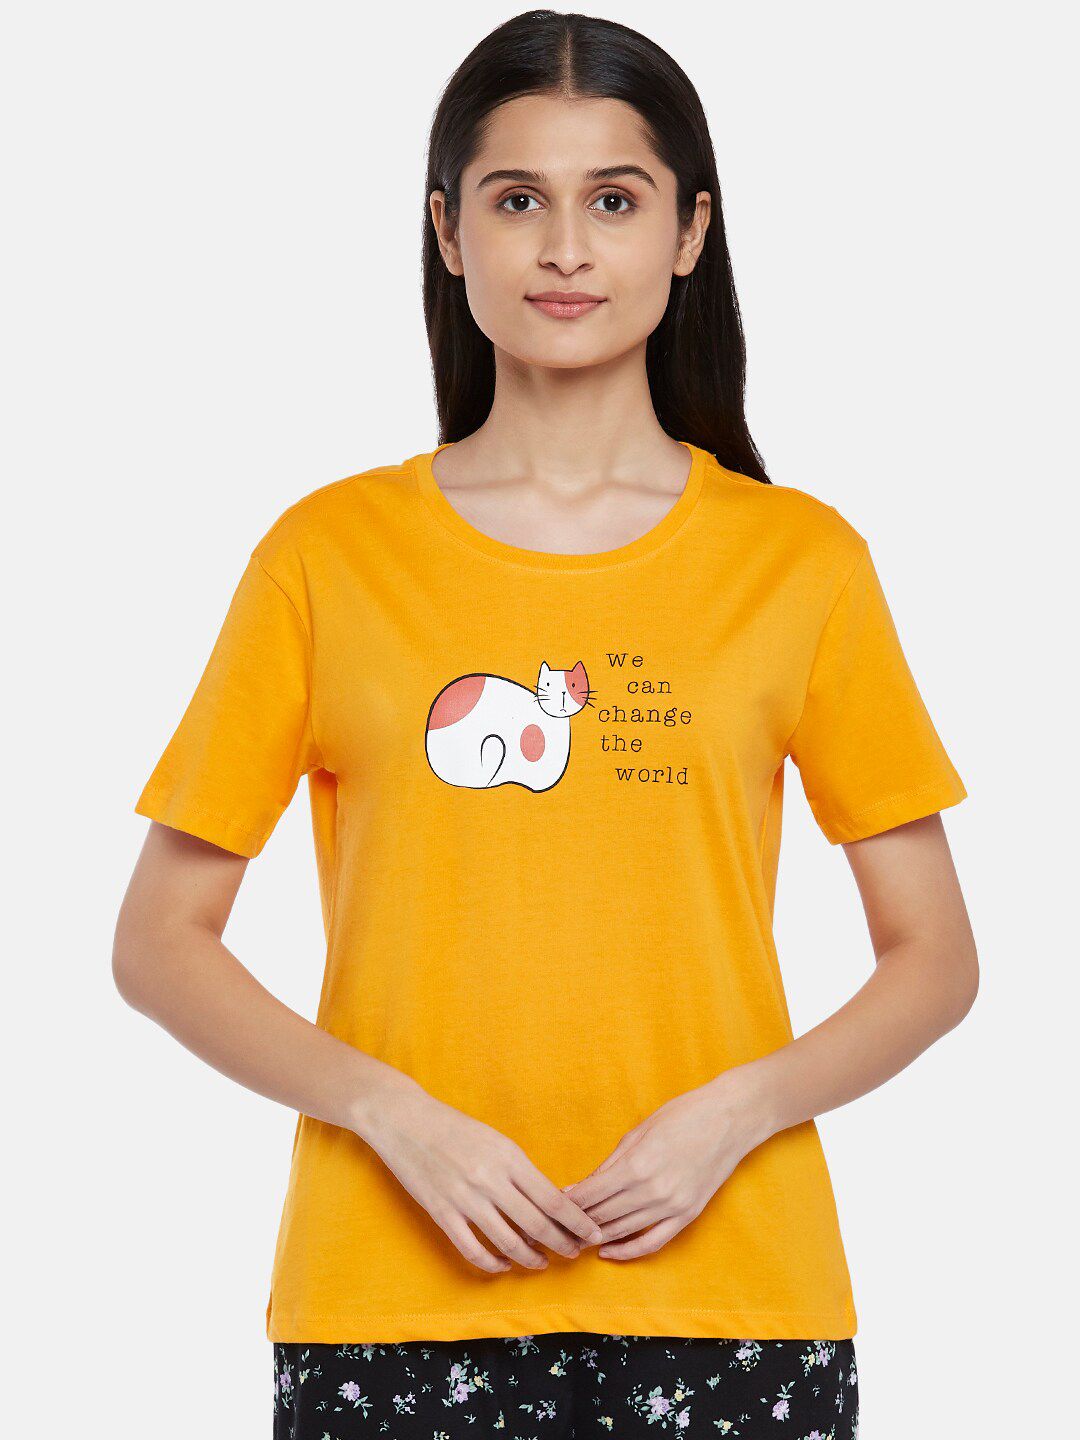 Dreamz by Pantaloons Yellow Pure Cotton Lounge tshirt Price in India